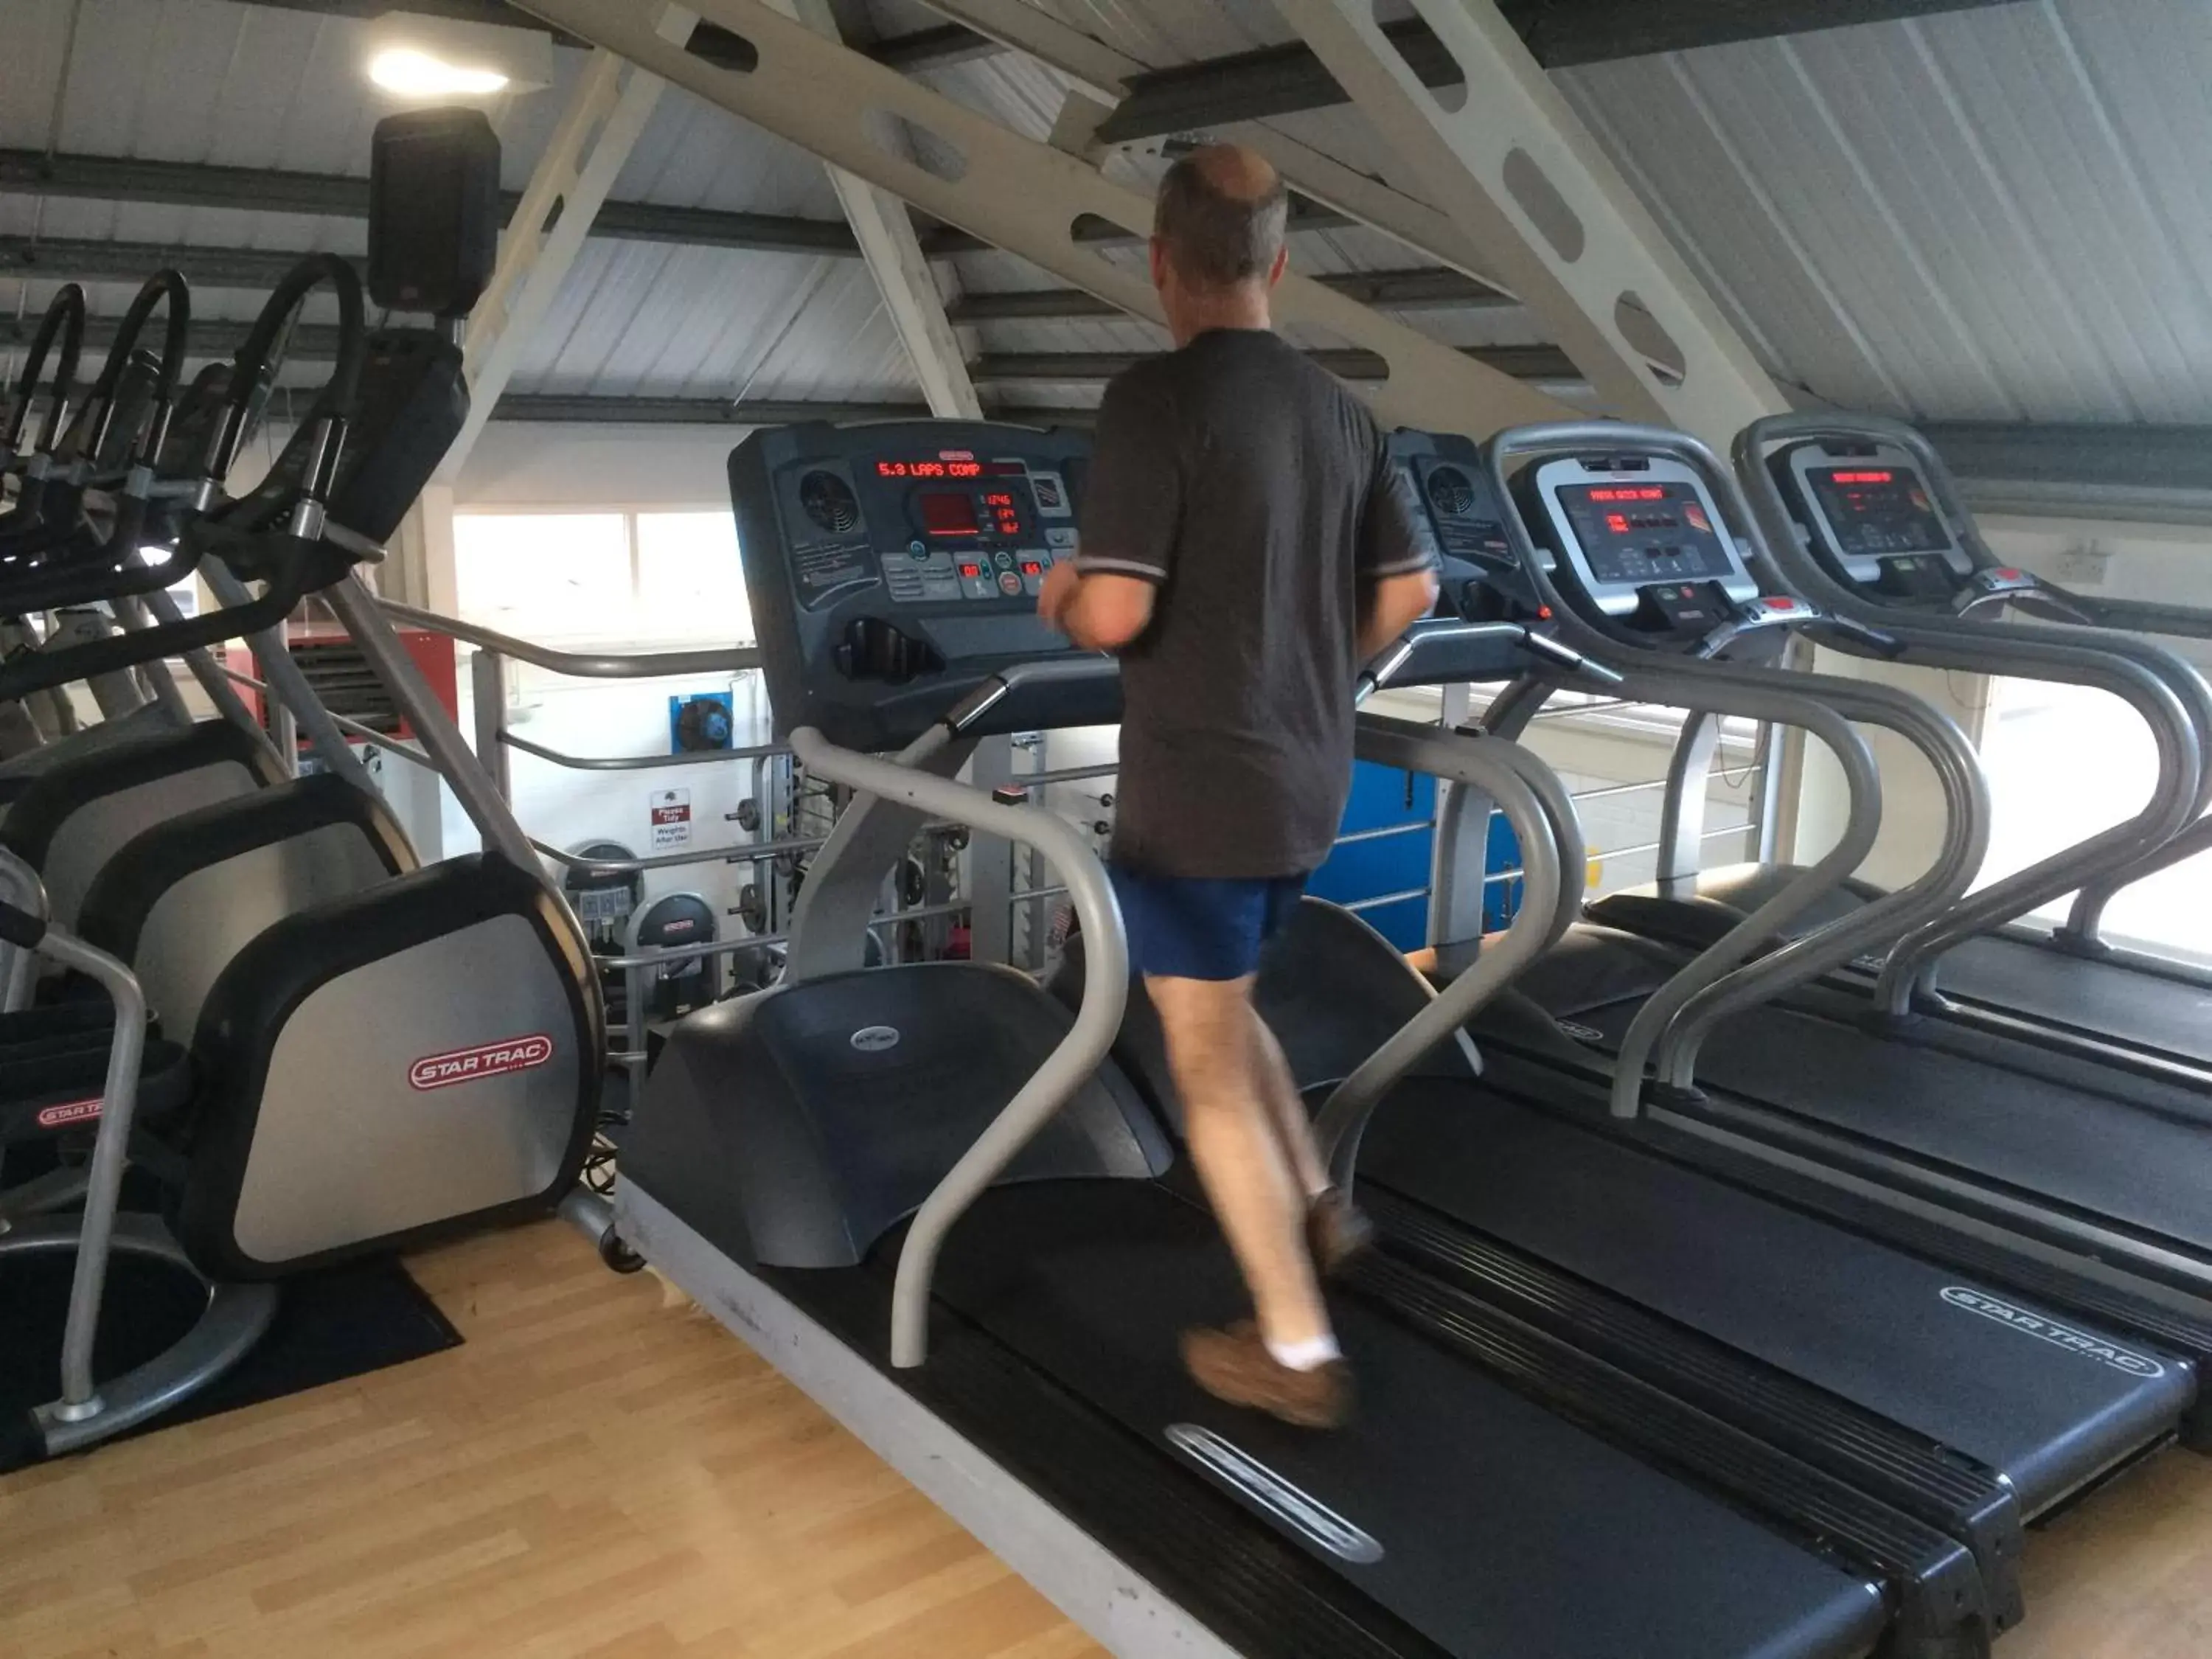 Off site, Fitness Center/Facilities in Cross Keys Hotel, Kelso